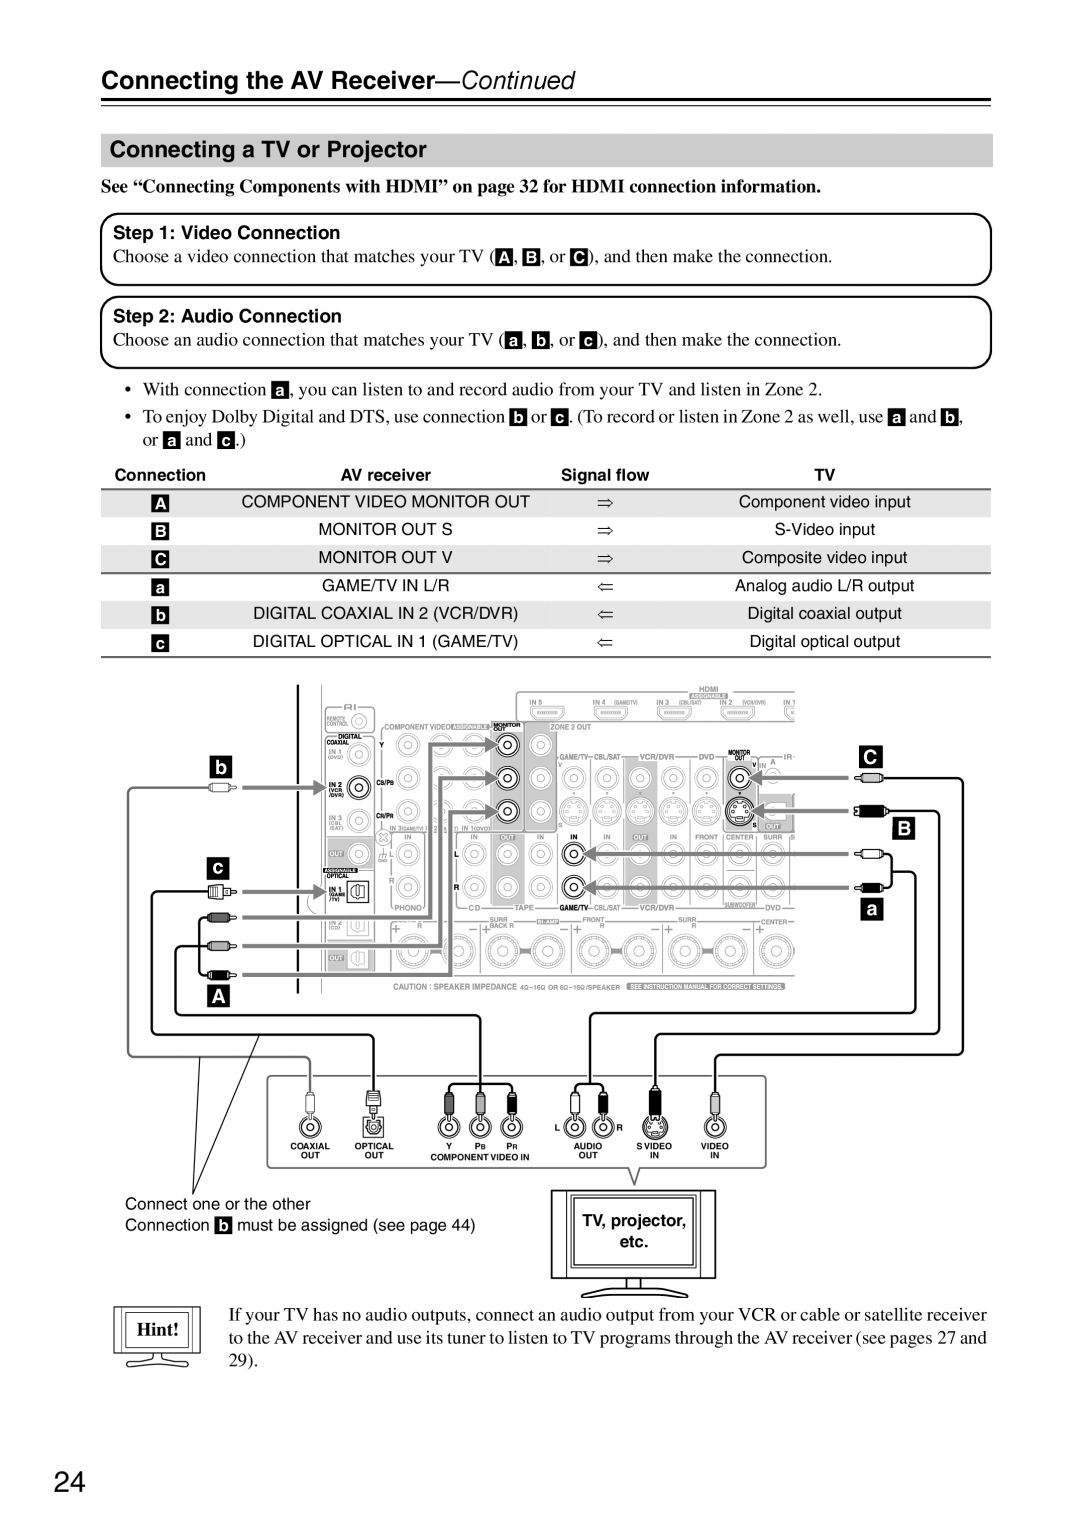 Onkyo DTR-7.9 instruction manual Connecting a TV or Projector, Hint, Connecting the AV Receiver—Continued 